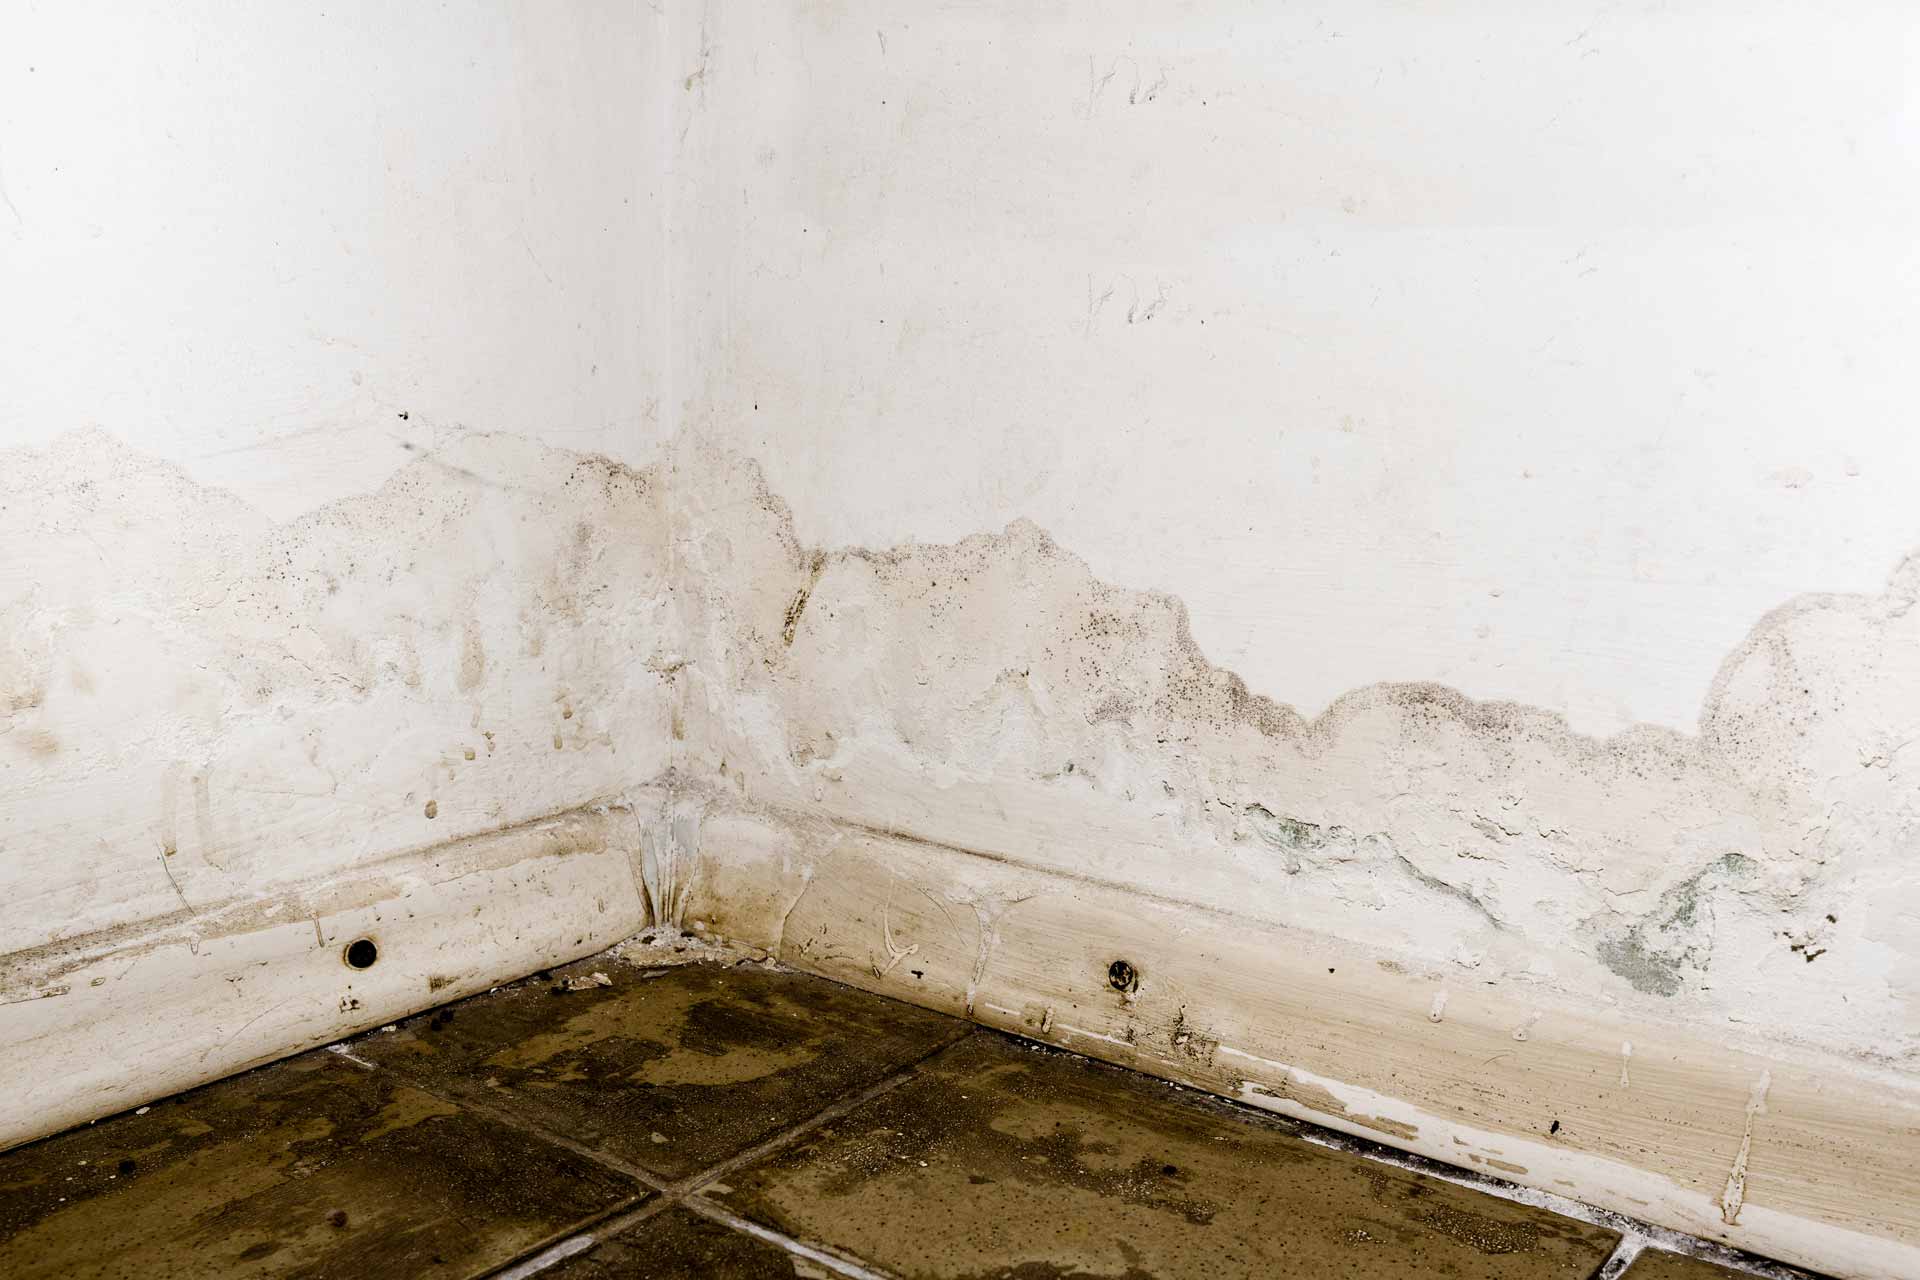 Flooded basement with water damage and mold